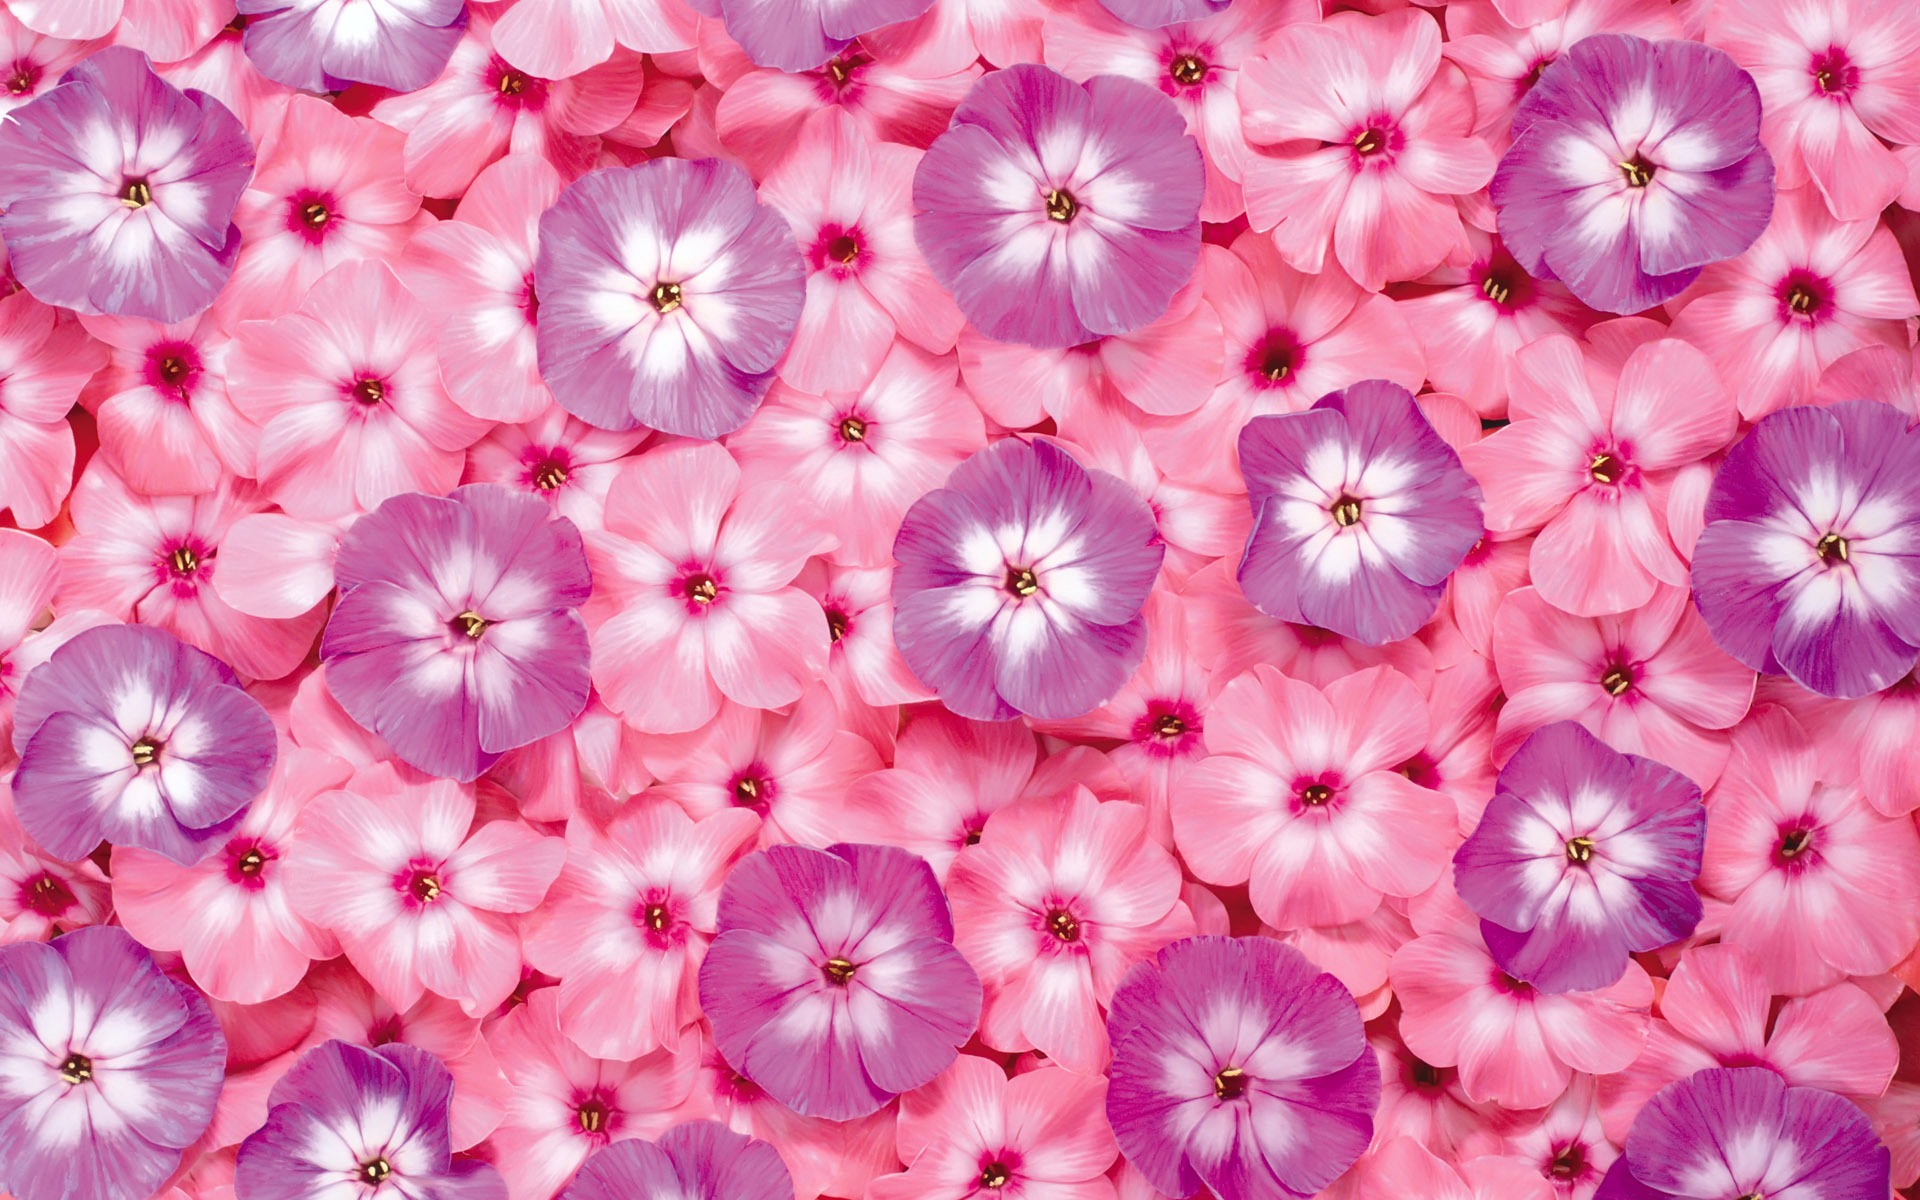 Surrounded by stunning flowers wallpaper #5 - 1920x1200